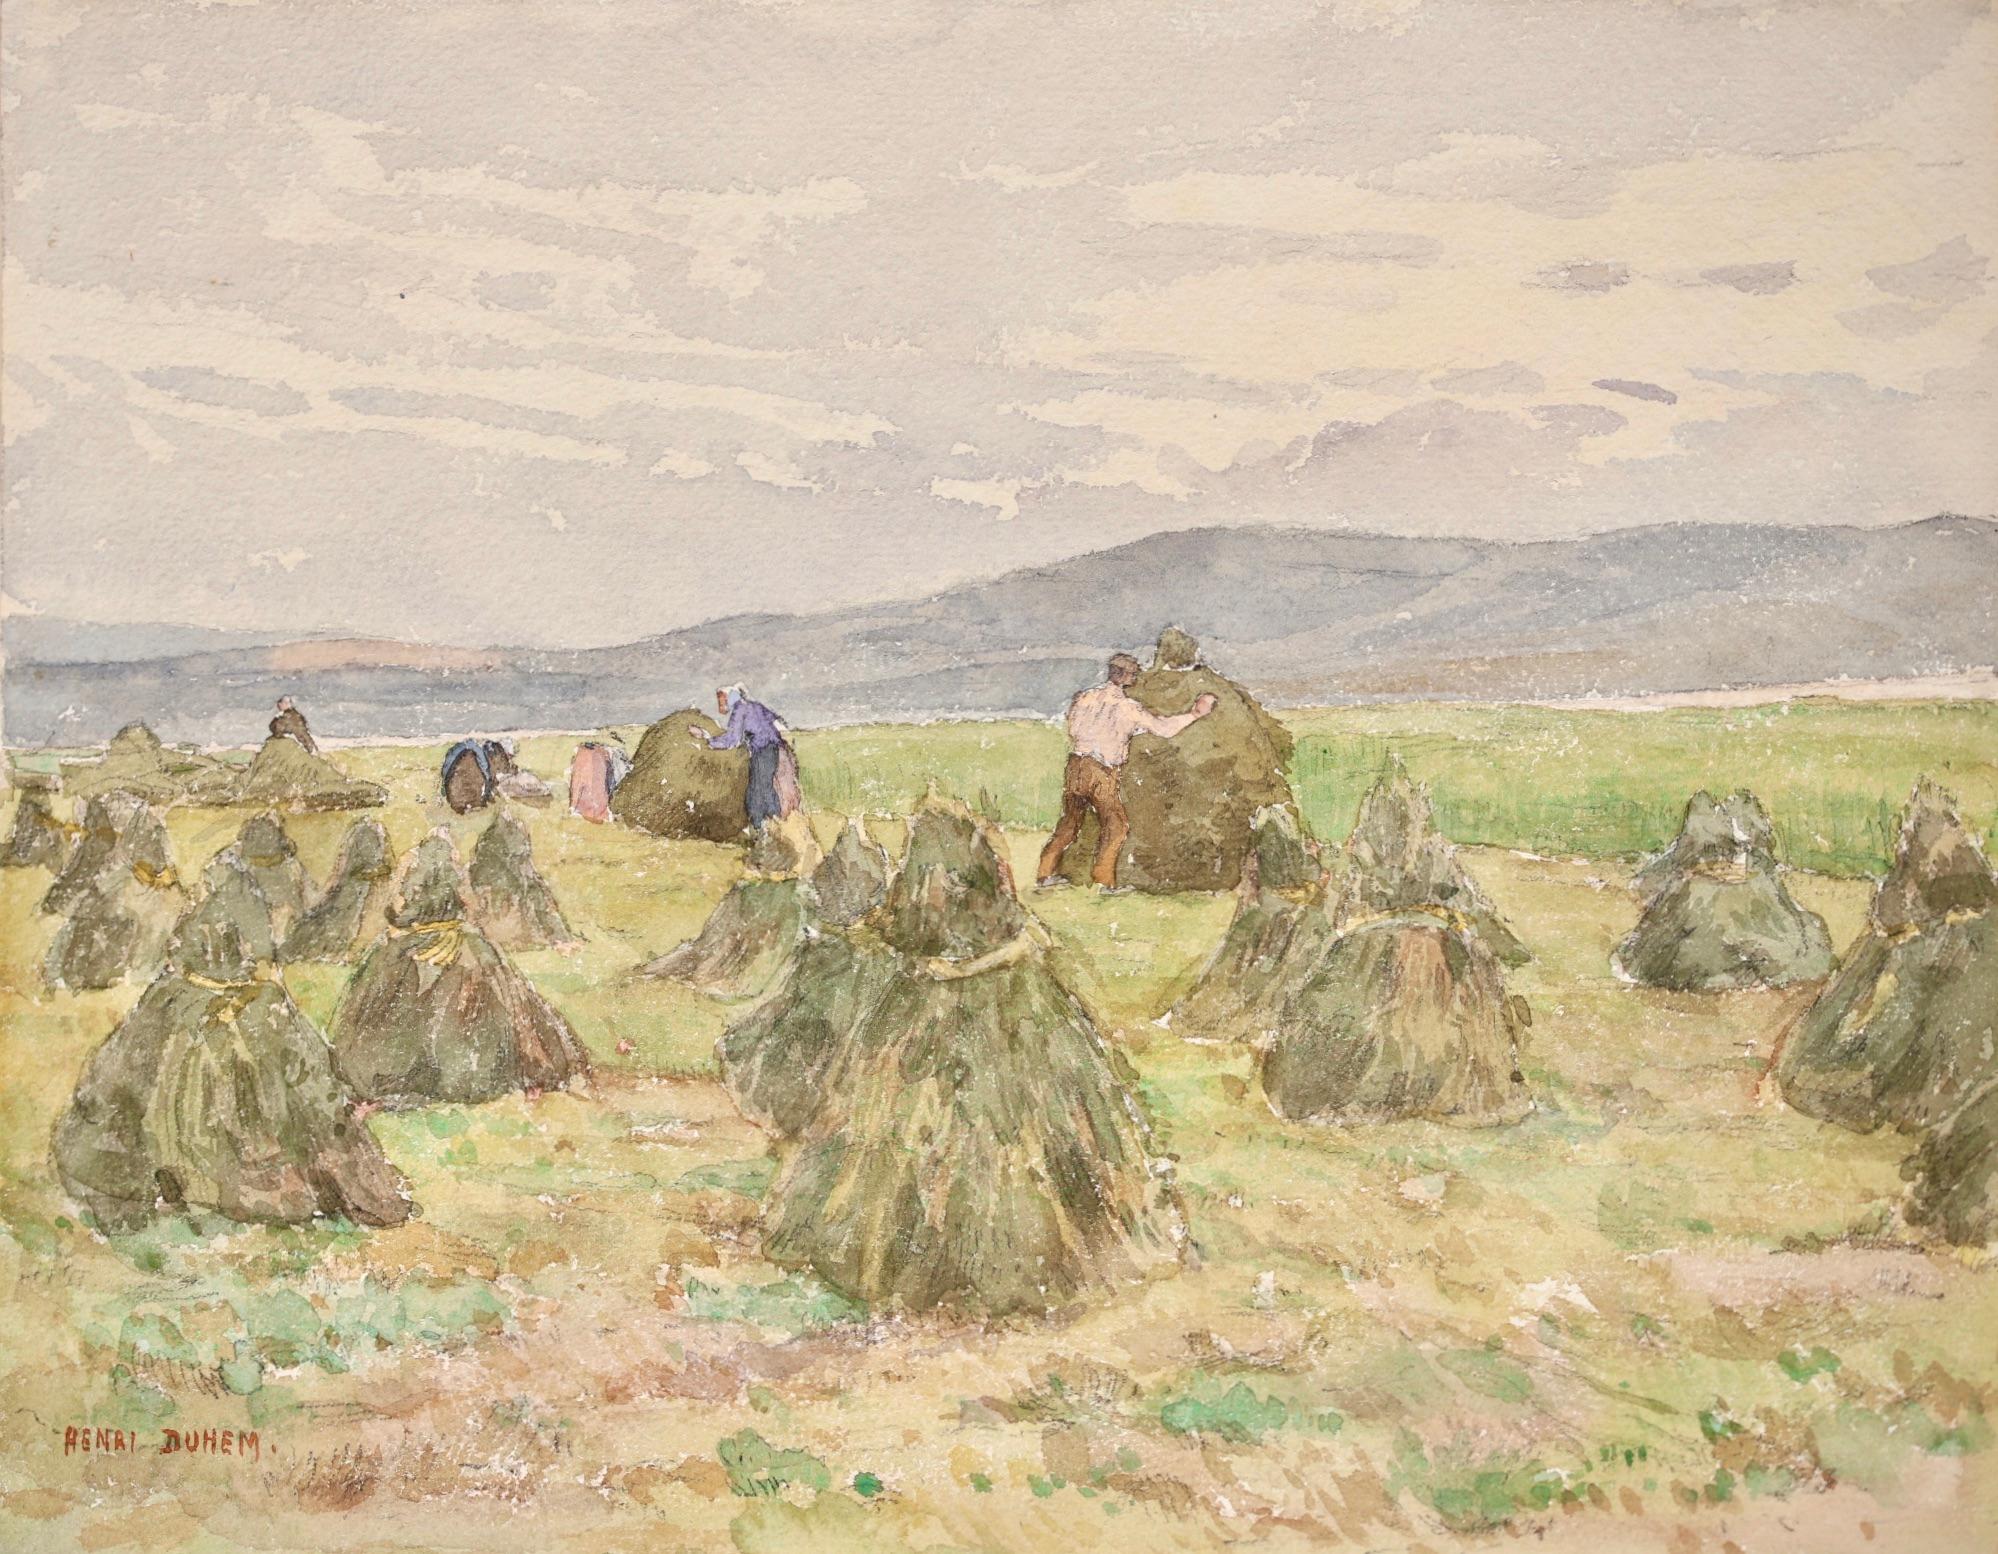 A wonderful watercolour on paper circa 1920 by French impressionist painter Henri Duhem. The work workers in a field making hay.

Signature:
Signed lower left 

Dimensions:
Unframed: 9"x11.5"
This painting is not currently framed but a suitable